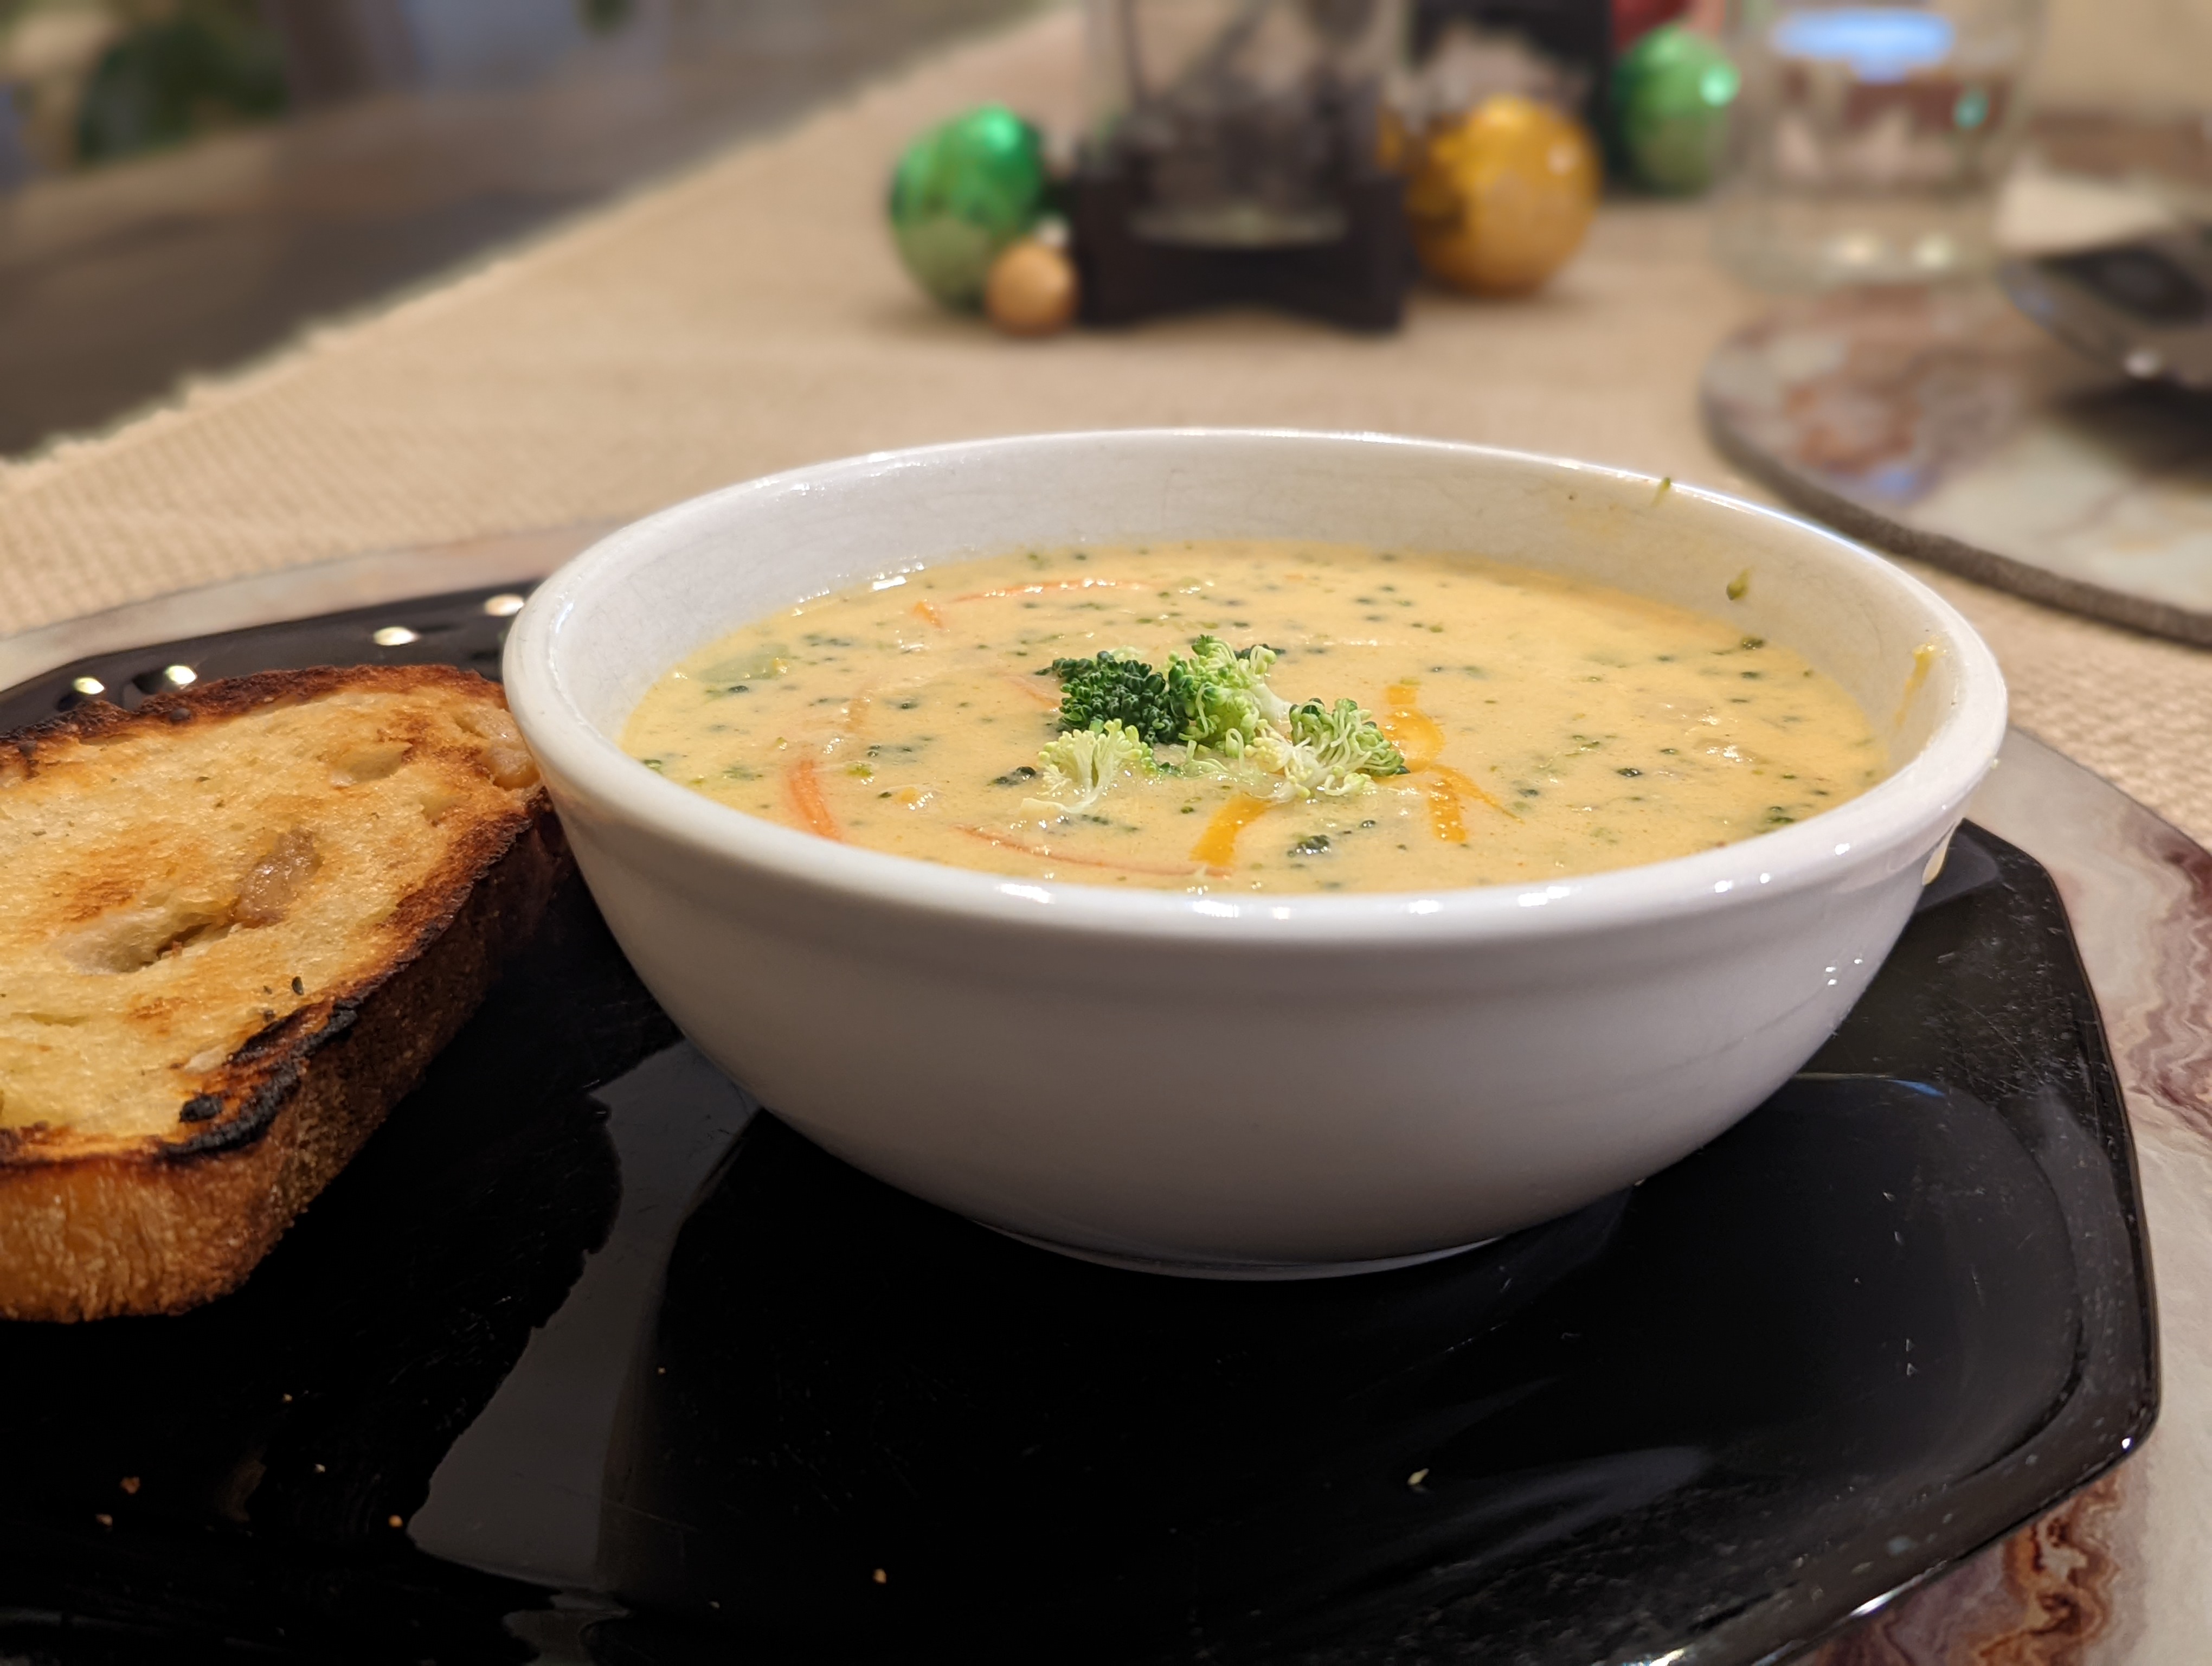 Healthy-ish Broccoli Cheddar Cheese Soup with Charred Bread